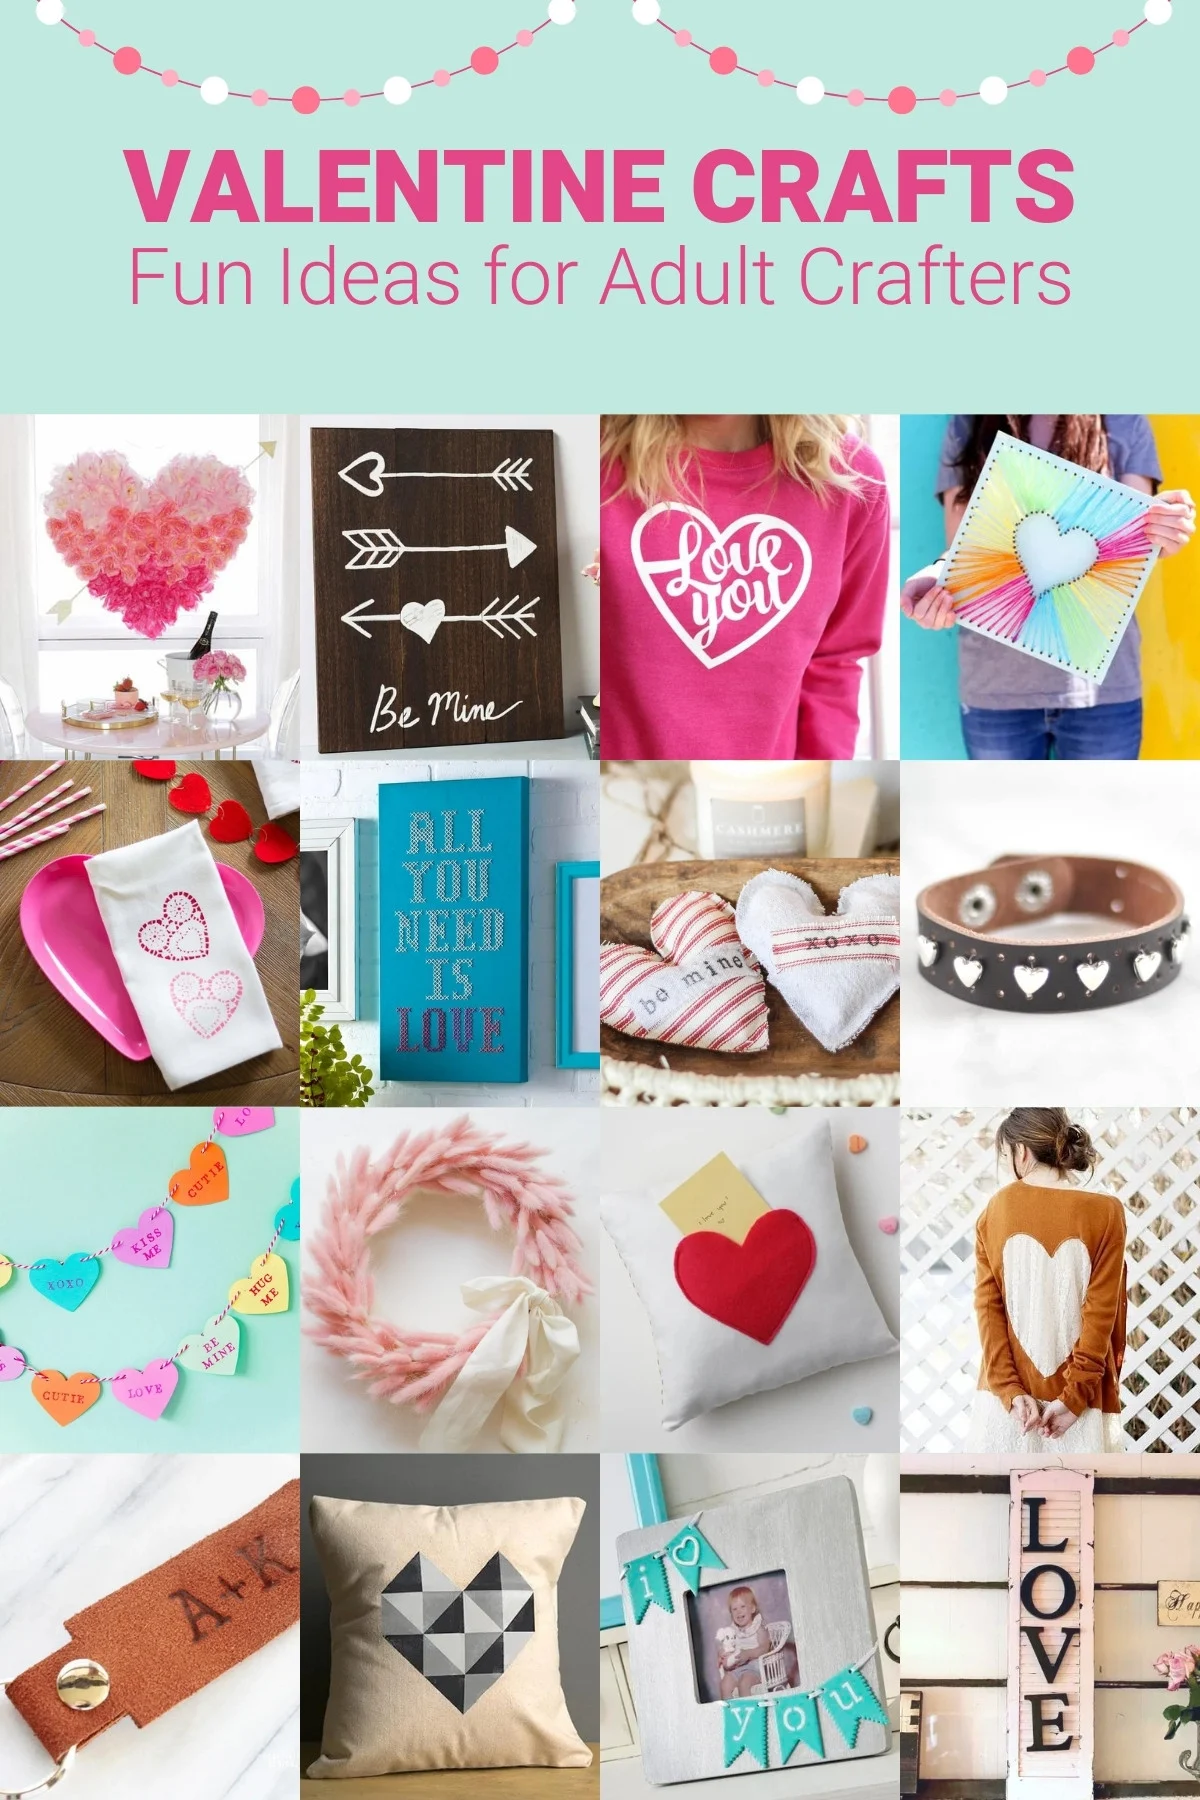 Color-me Heart Valentines Sewing Tutorial - A Great DIY Gift for All Ages